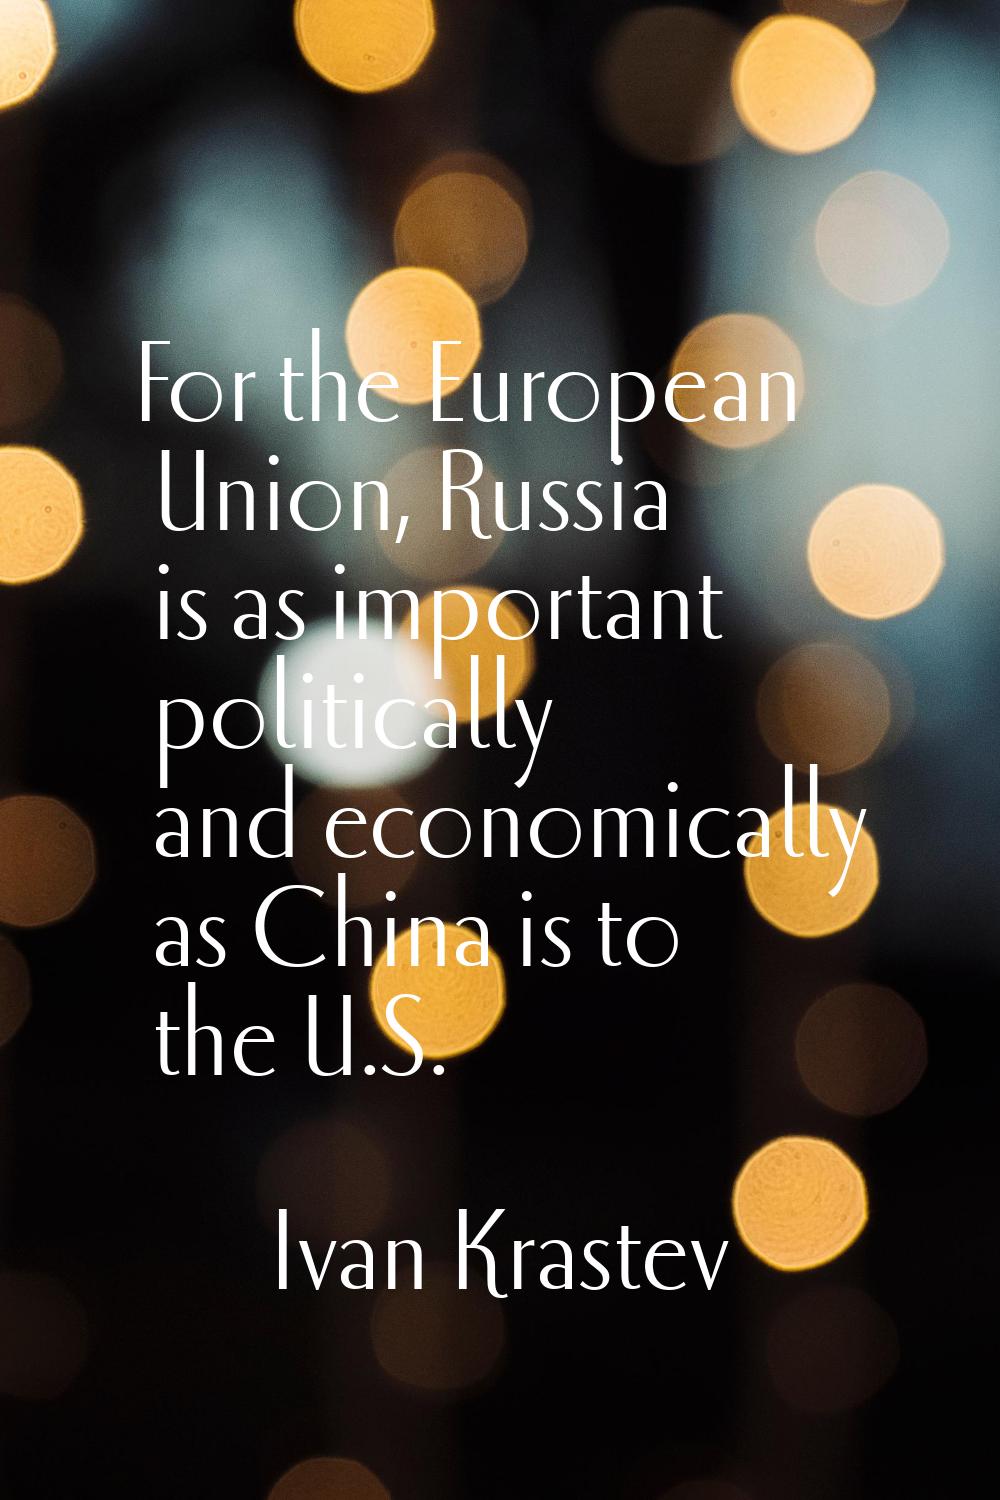 For the European Union, Russia is as important politically and economically as China is to the U.S.